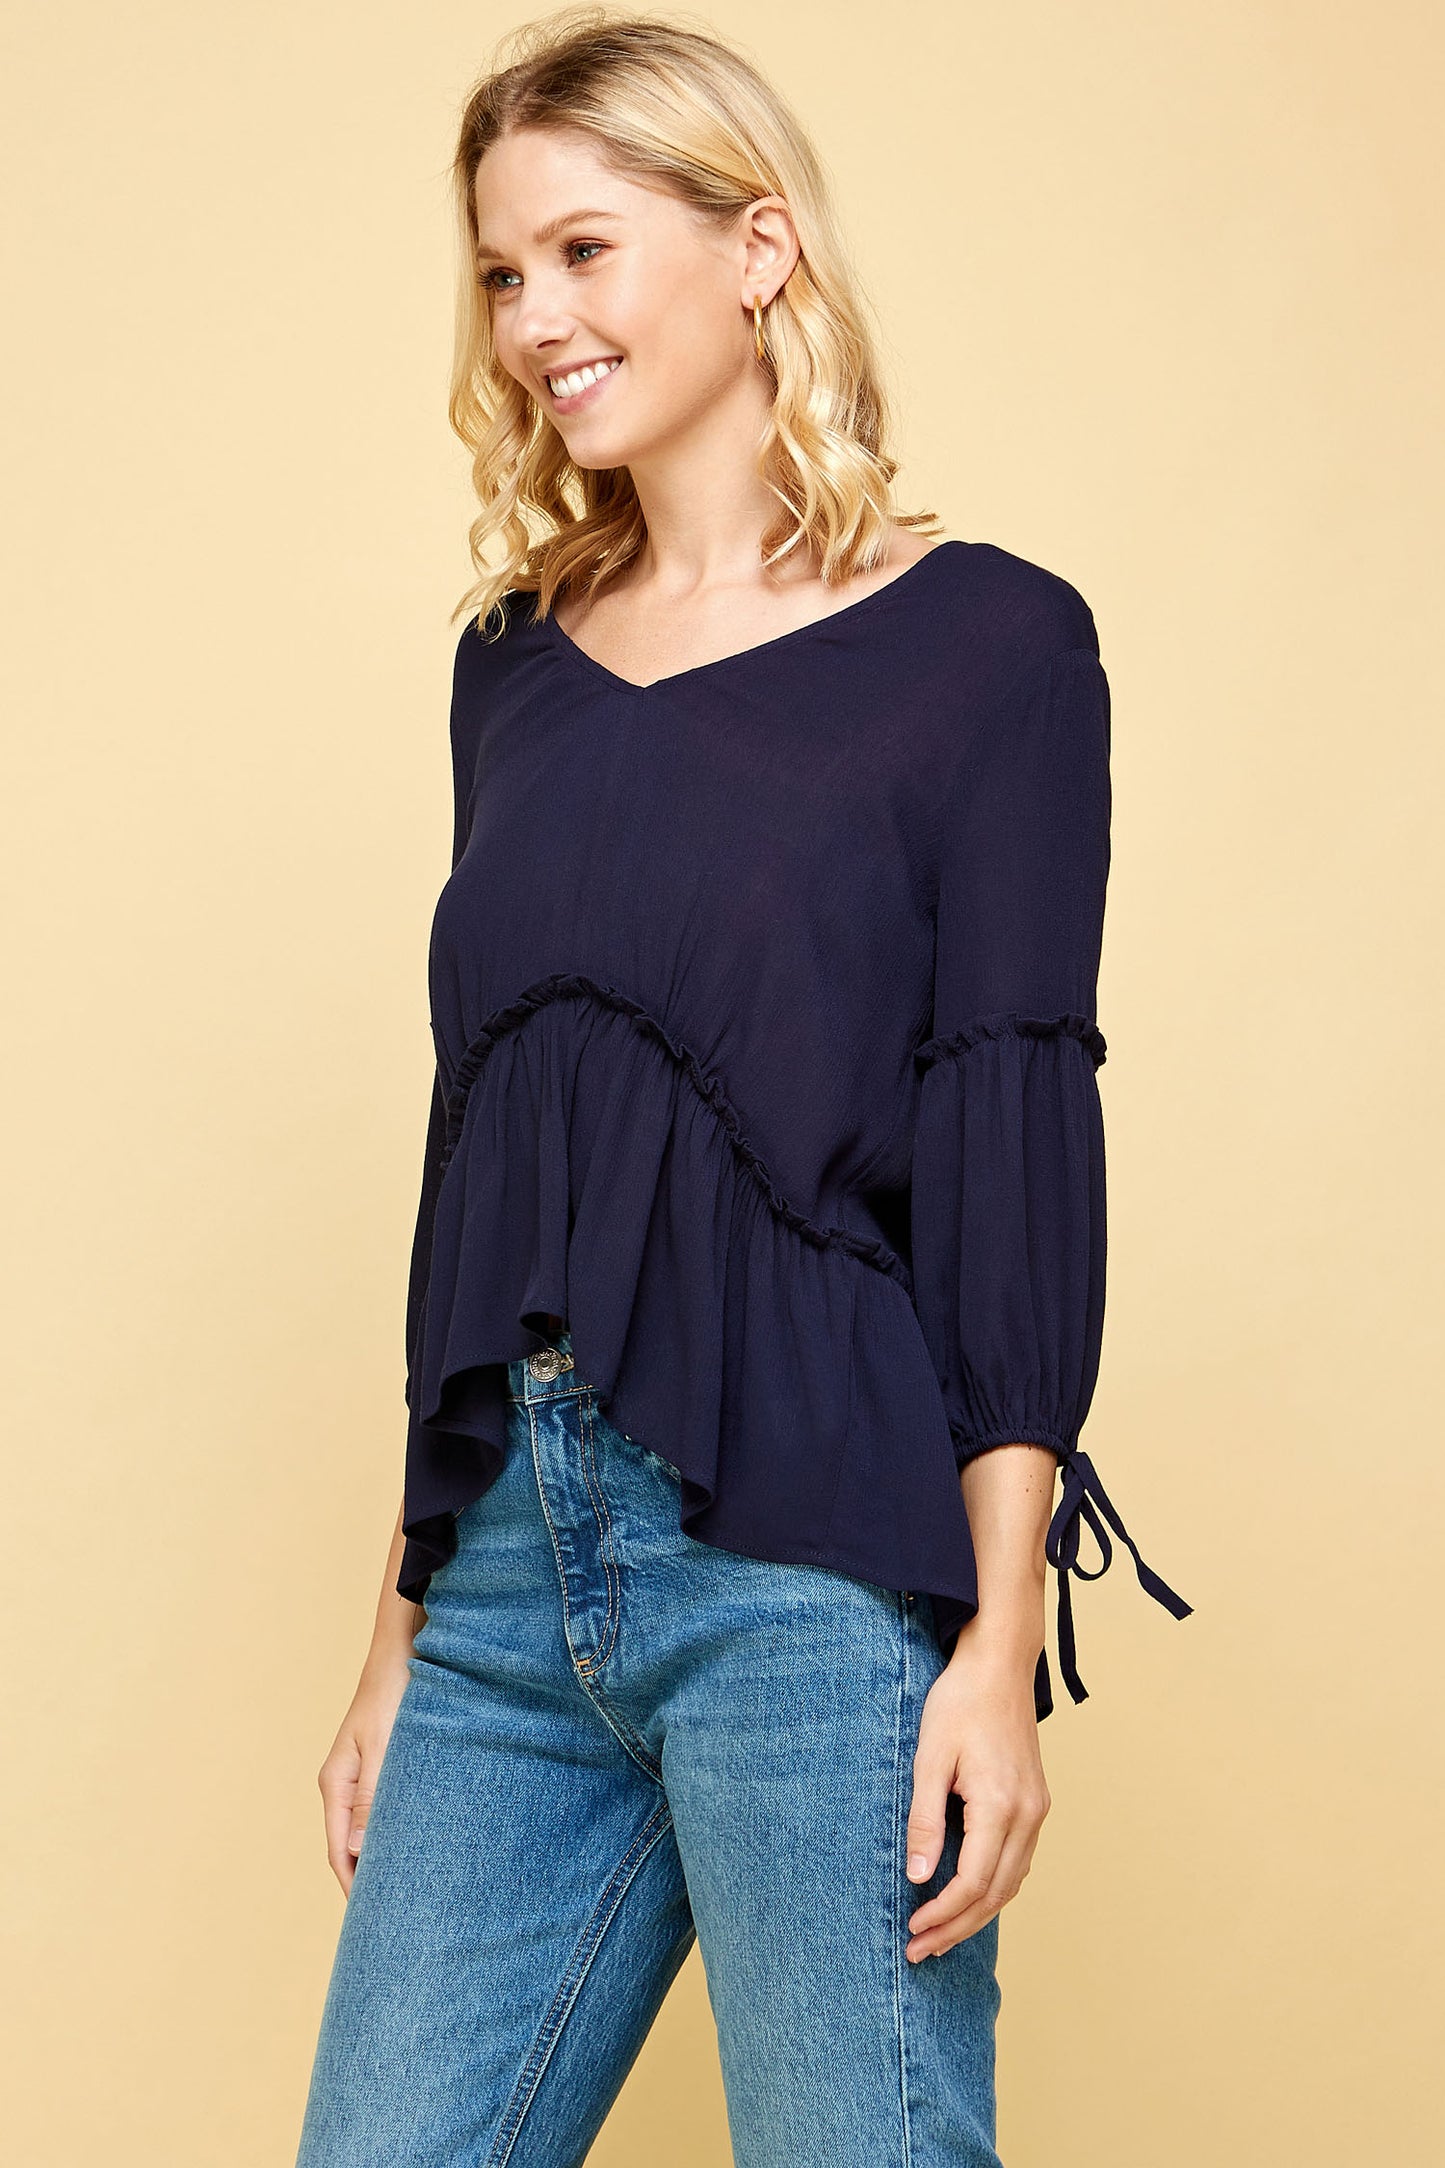 QUARTER SLEEVE TIERED PEASANT TOP IN NAVY